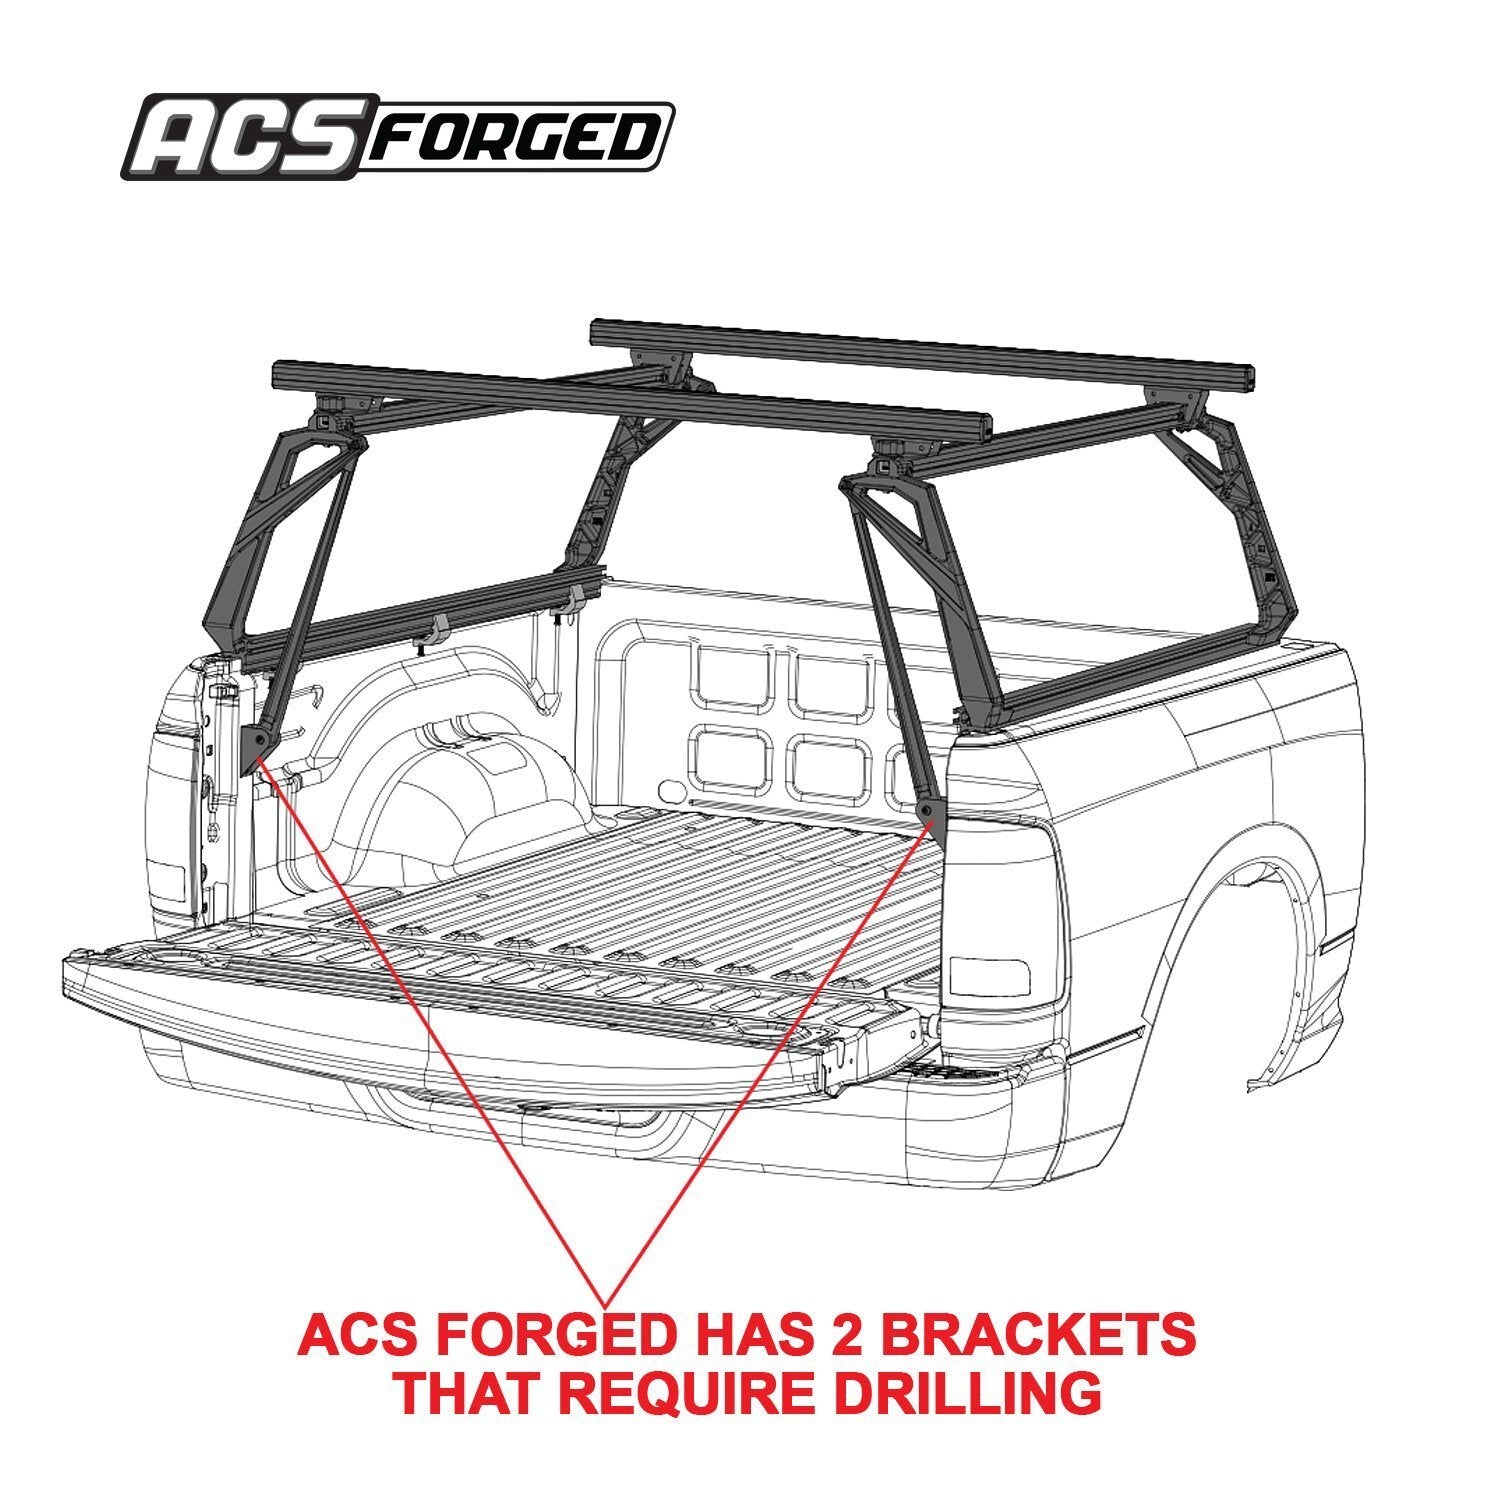 '09-20 Dodge Ram 2500/3500-ACS Forged Bed Accessories Leitner Designs design